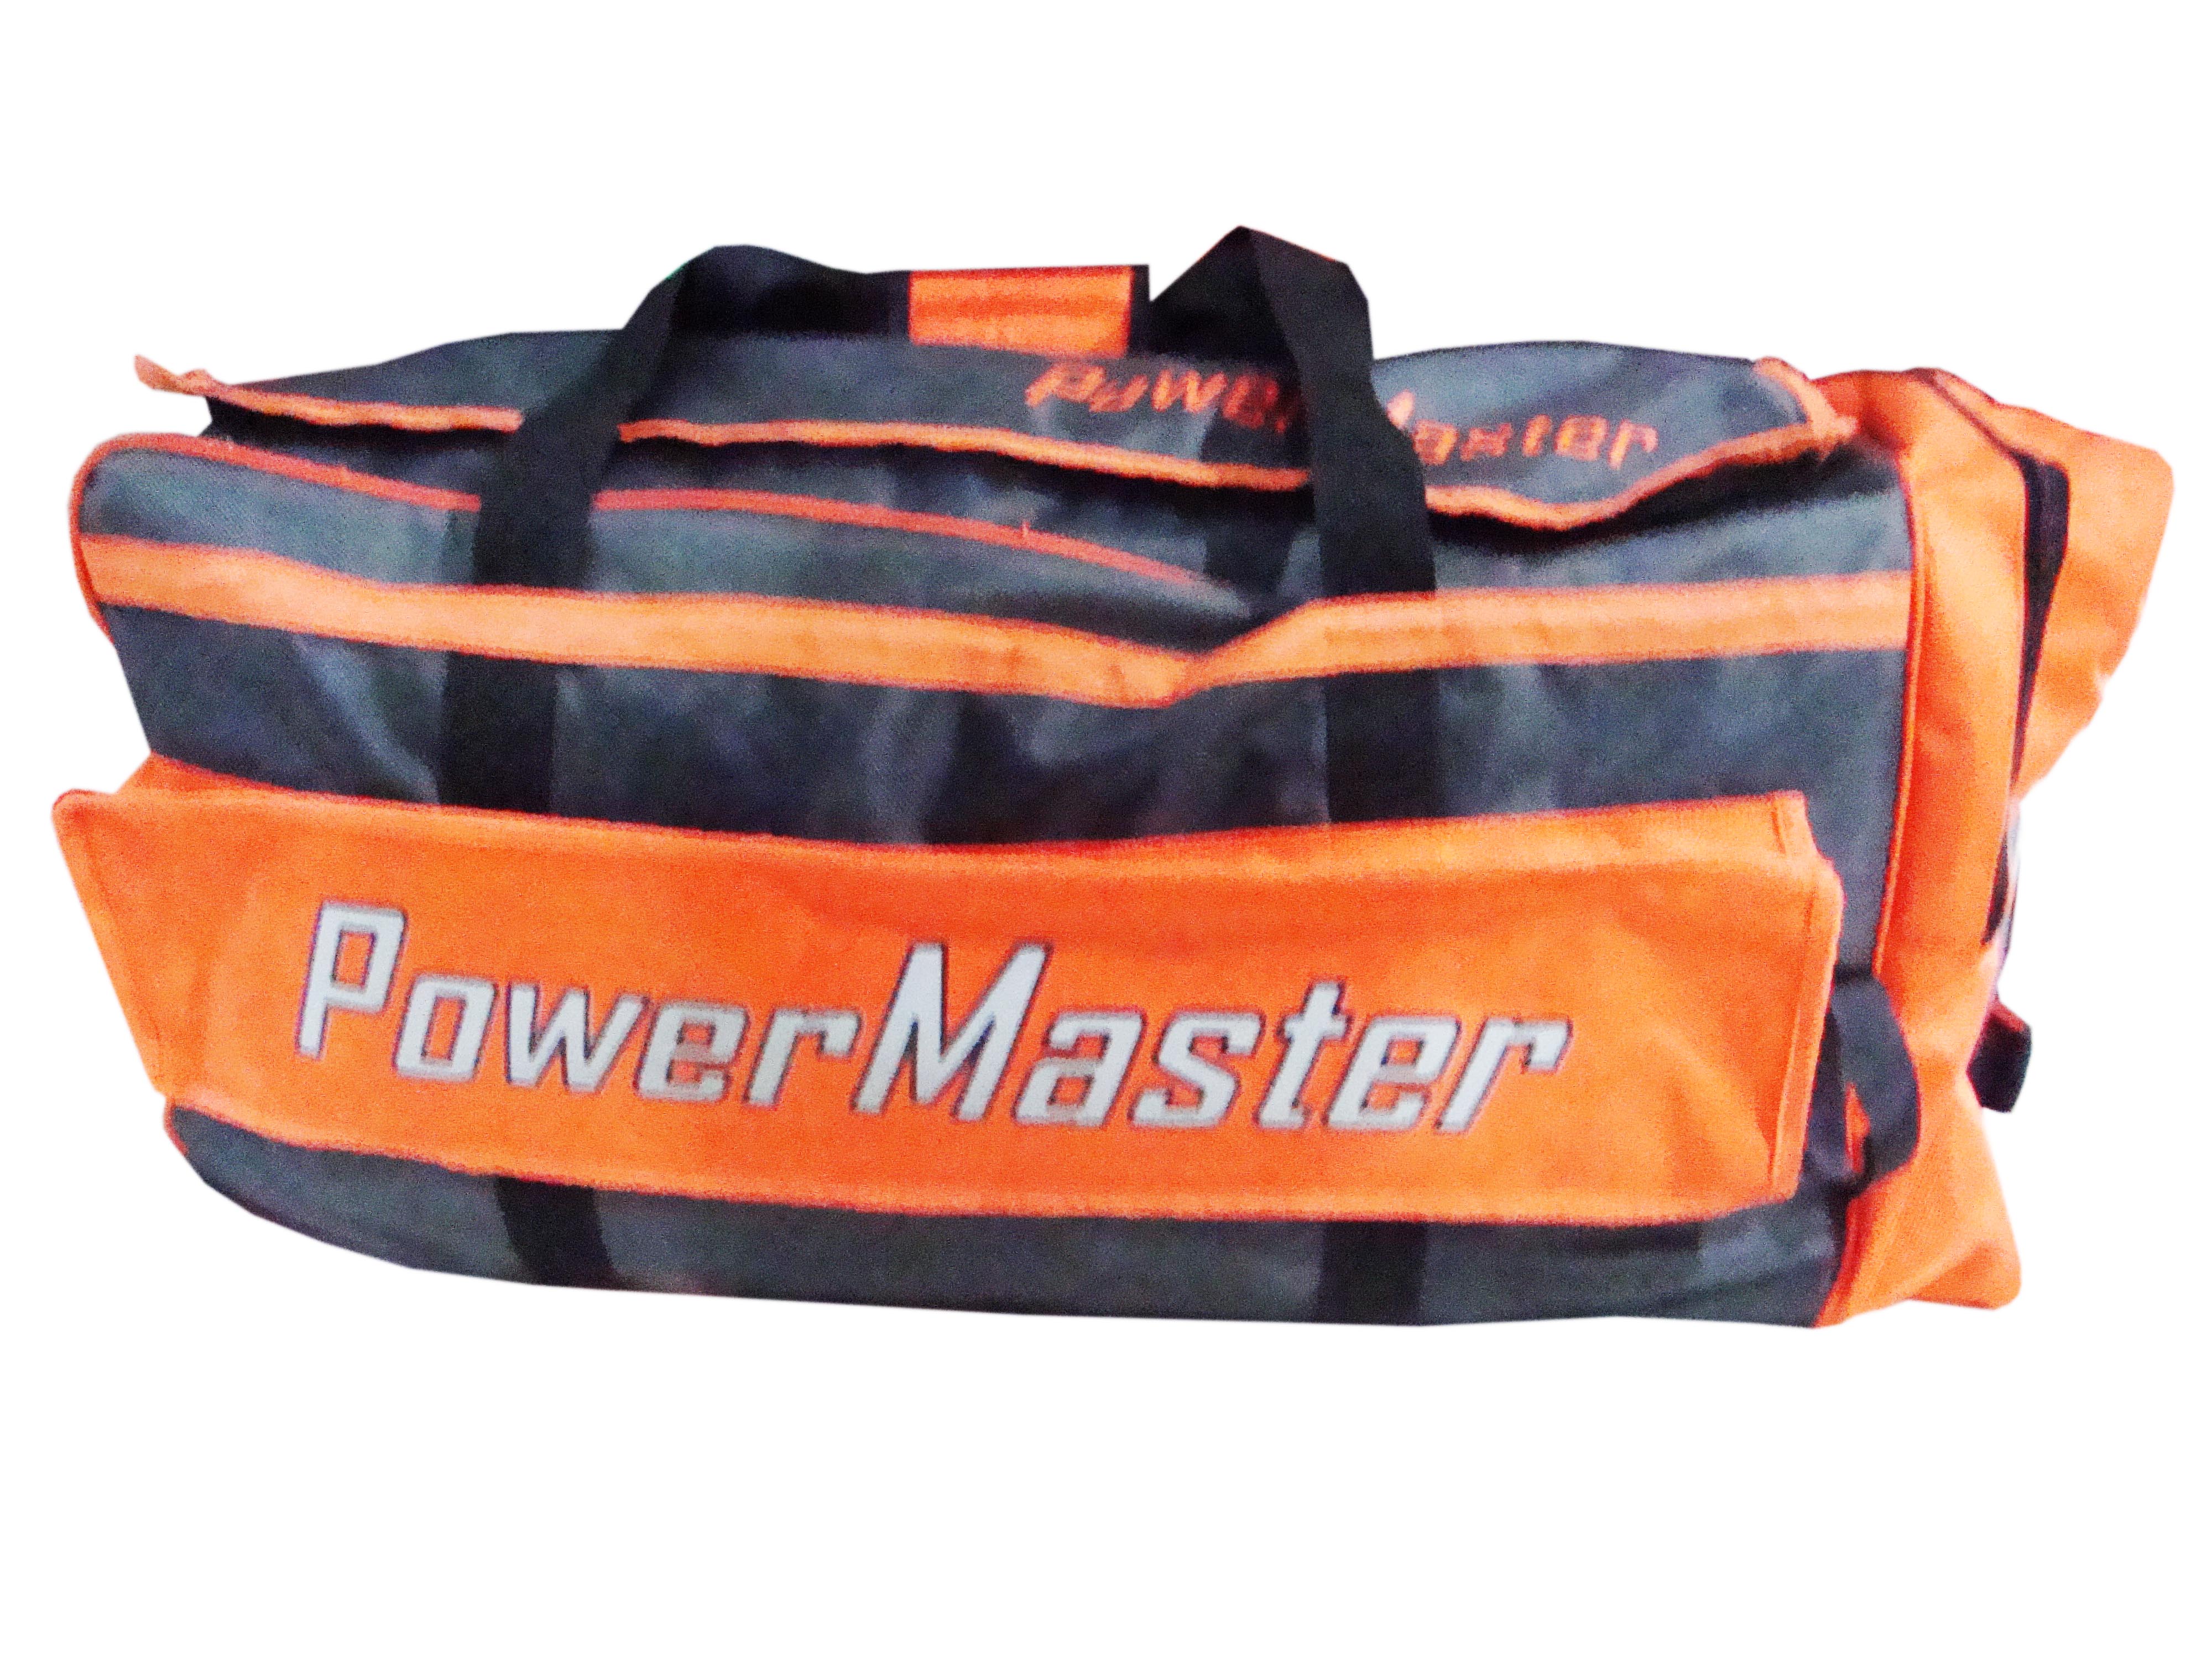 Cricket Bag with Wheels Power Master